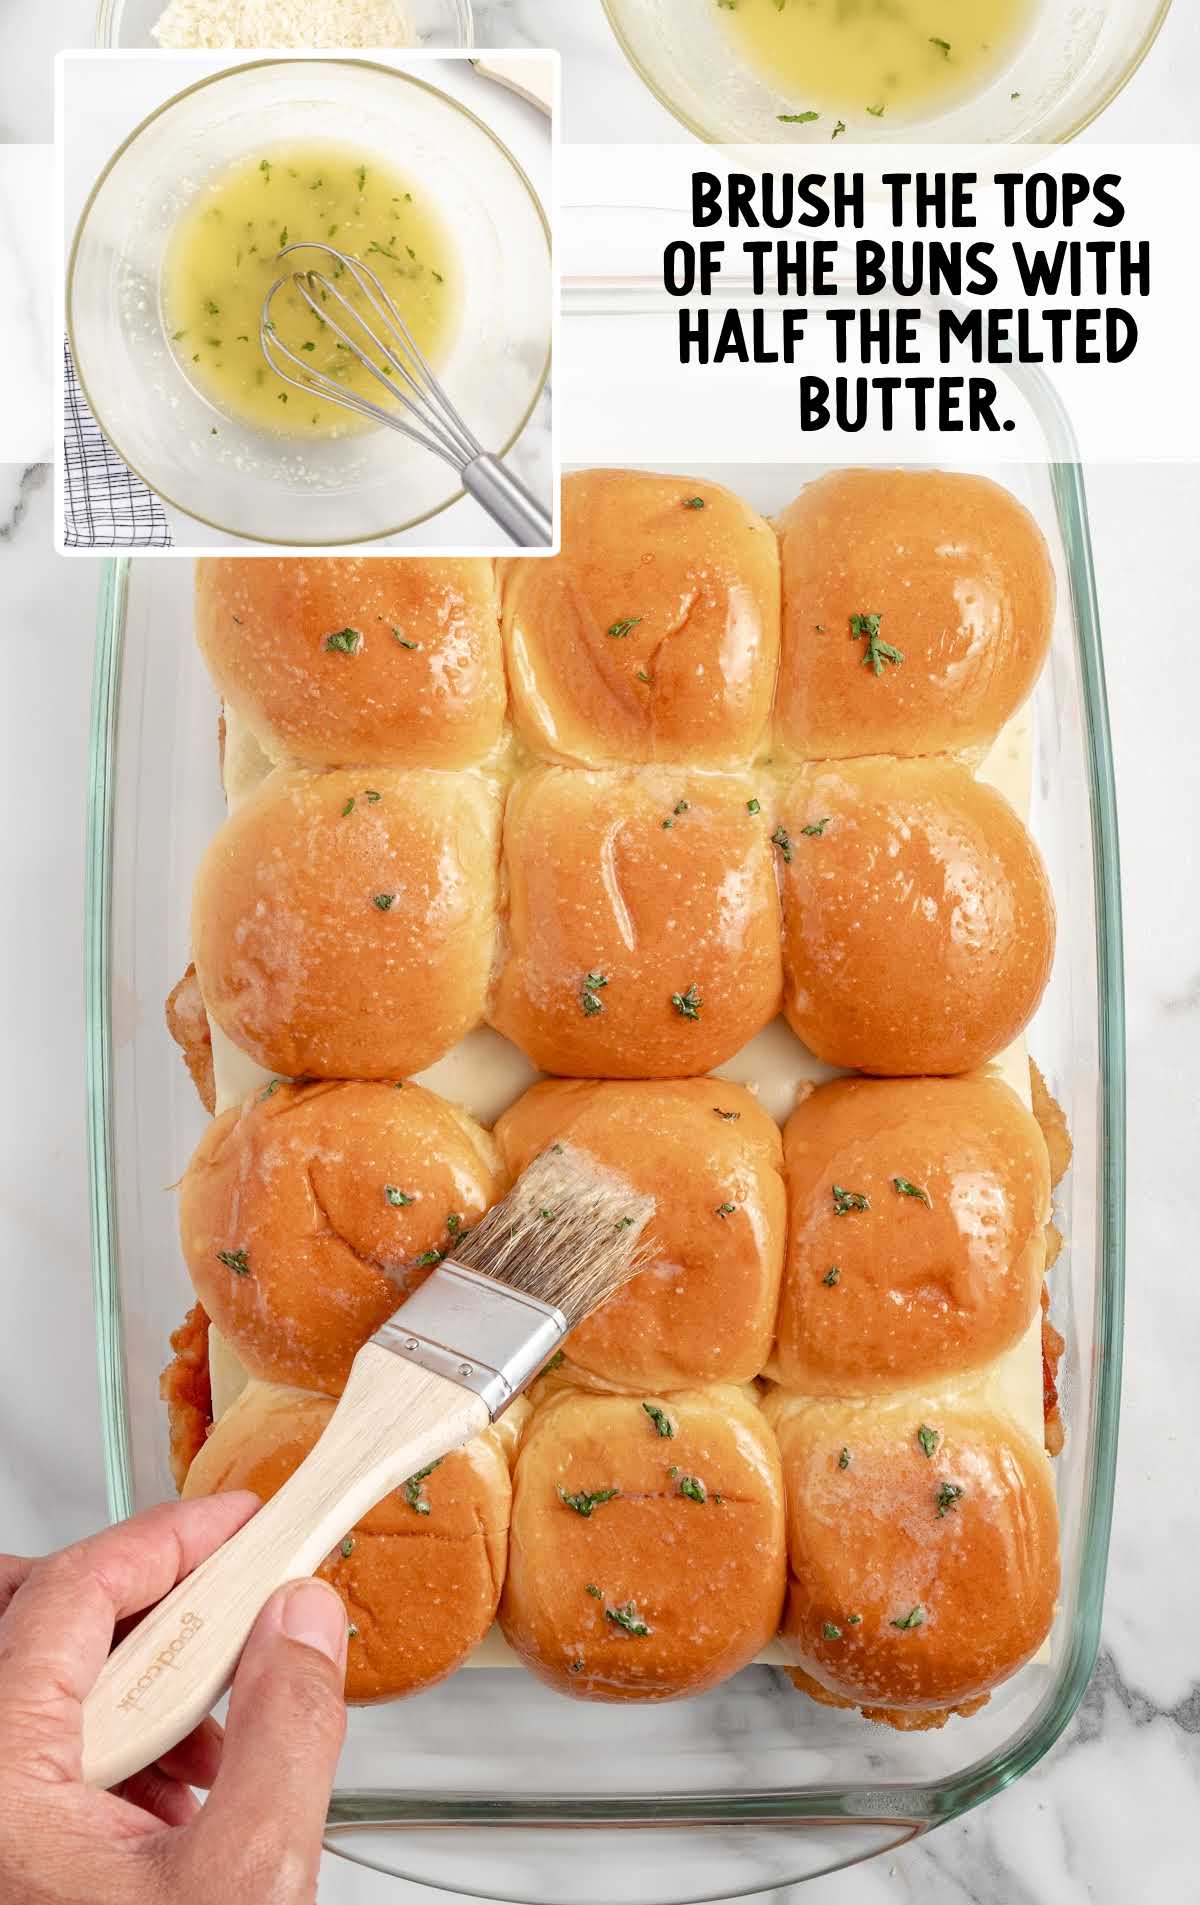 buns brushed with melted butter mixture in a baking dish